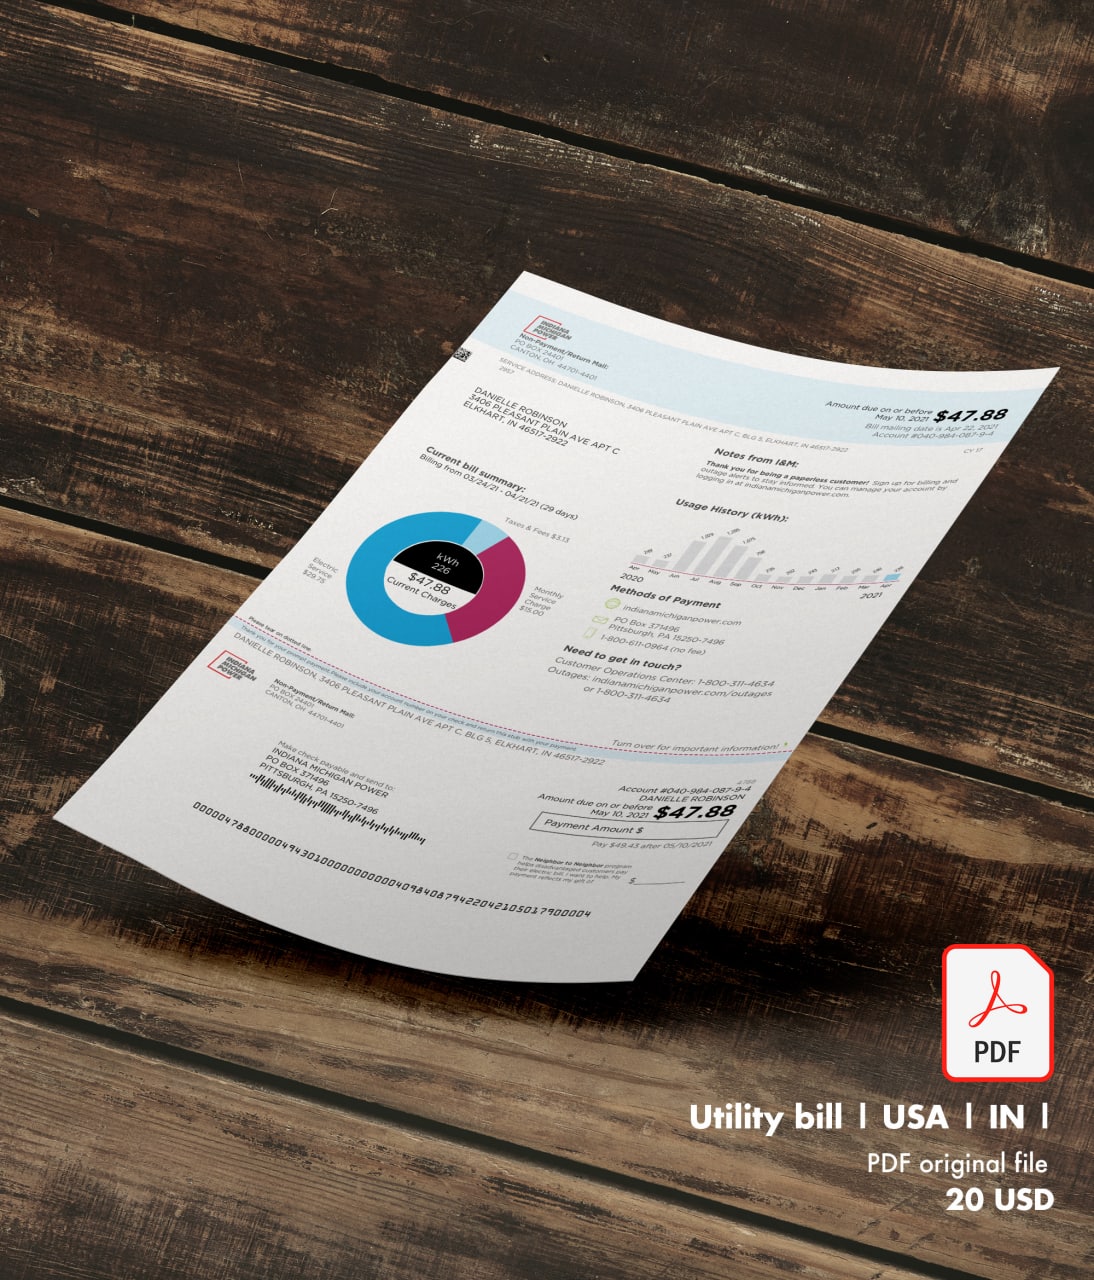 Utility bill | Indiana POWER | USA | IN-0